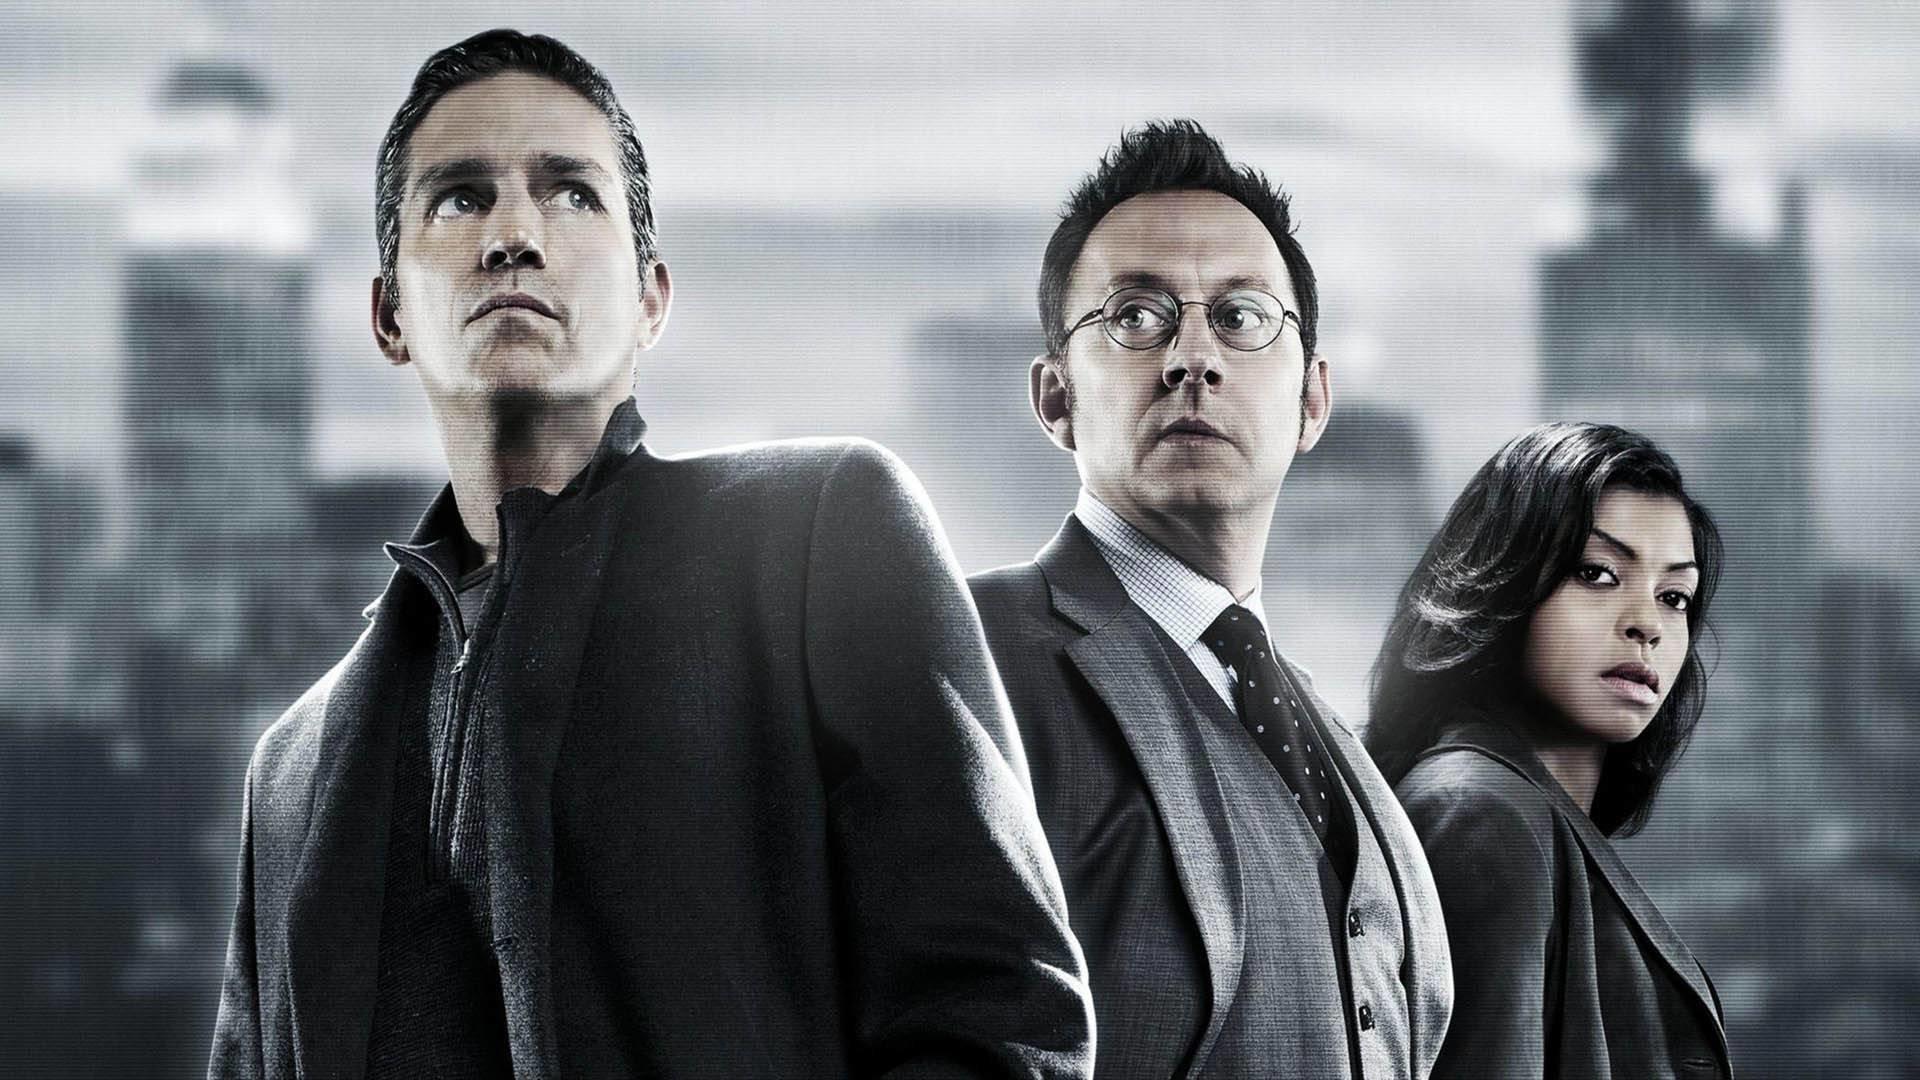 person of interest root wallpaper